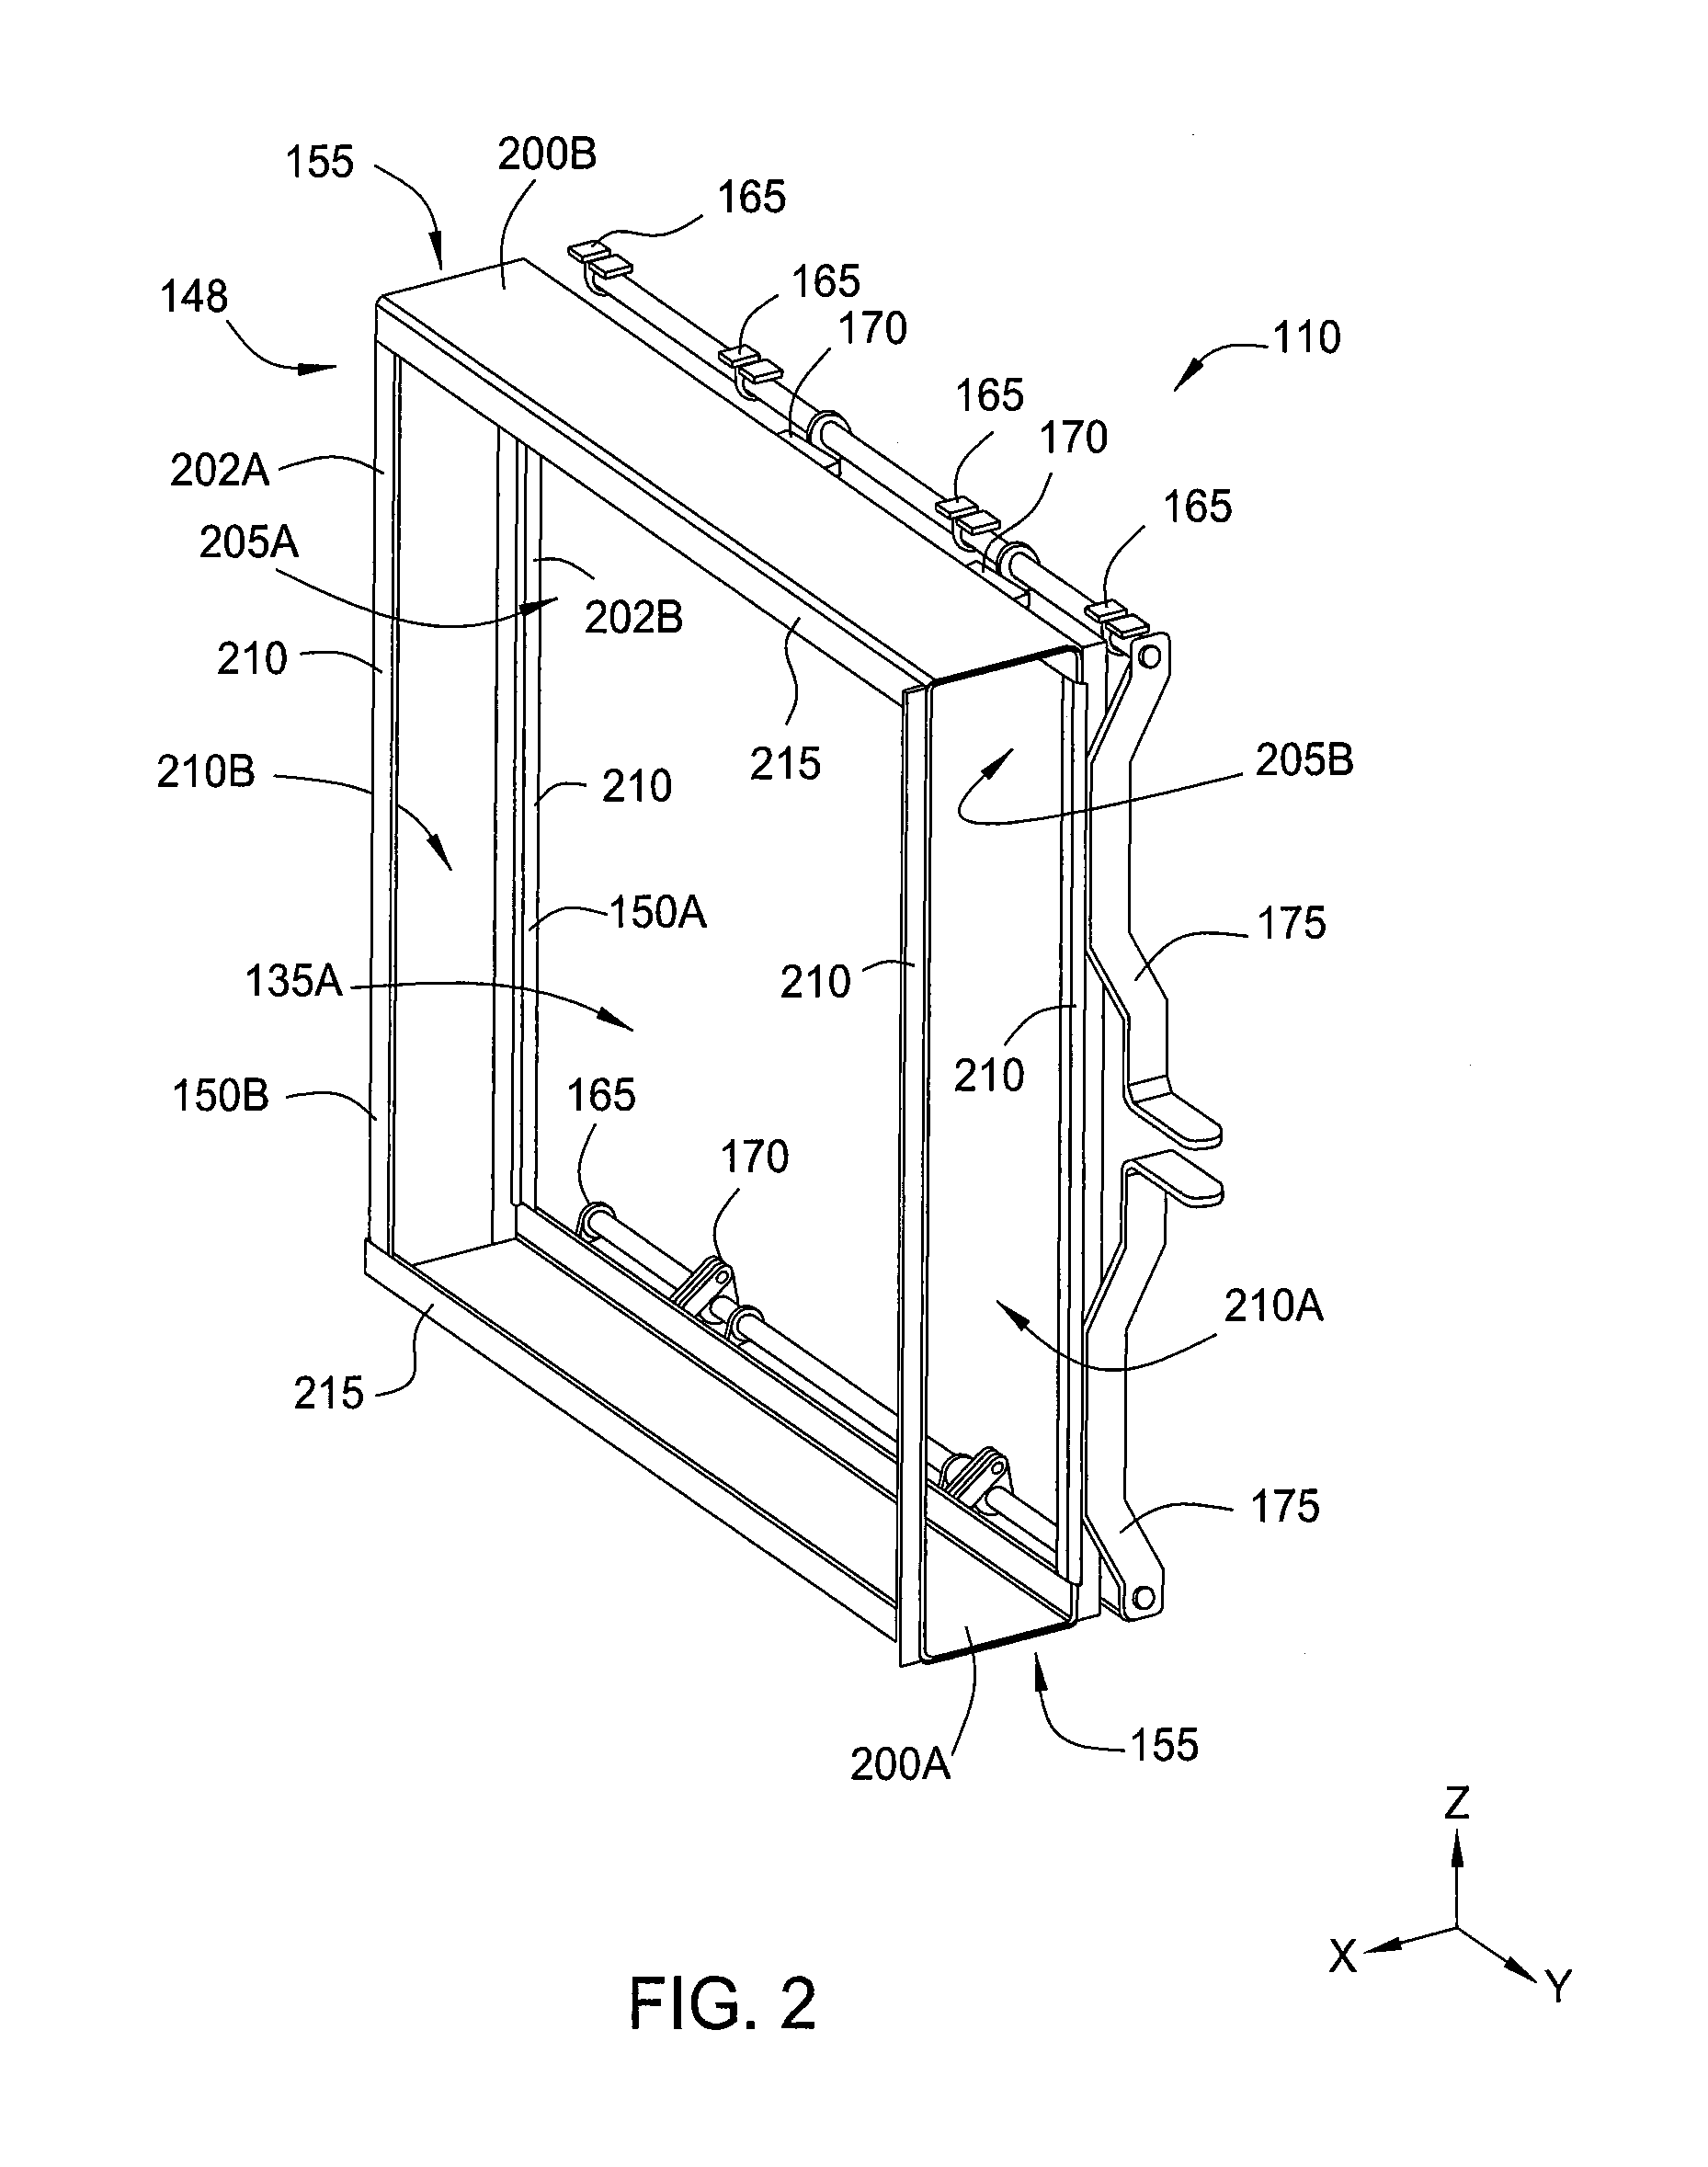 Filter holding frame with adjustable clamping mechanism and slot for pre-filter